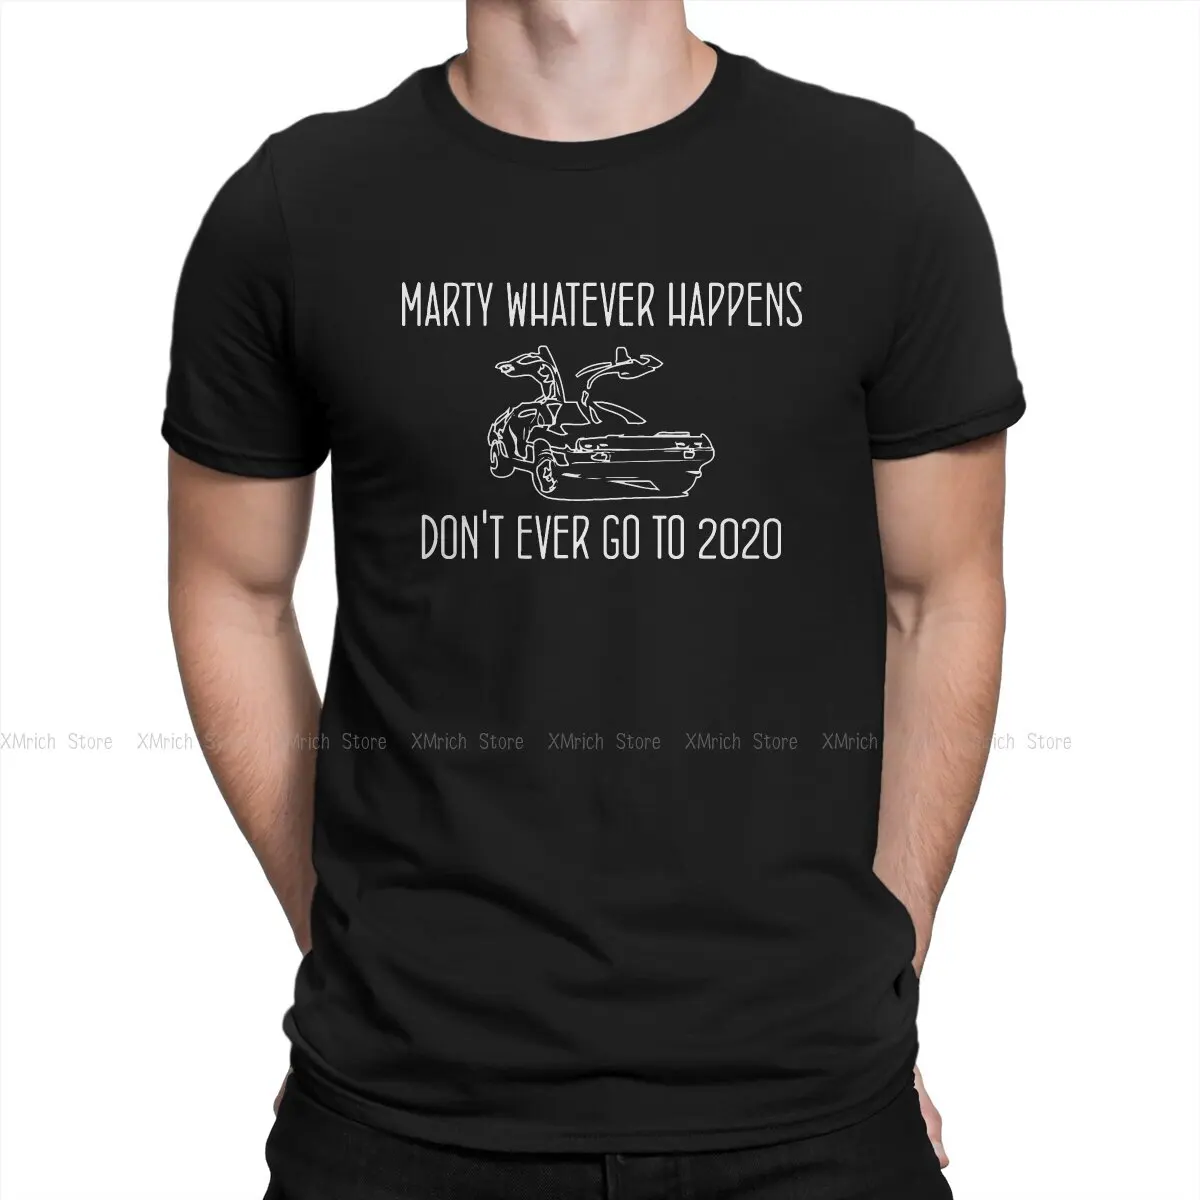 

Back to the Future Film Newest TShirt for Men Marty Whatever Happens Don't Ever Go To 2020 Round Collar Pure Cotton T Shirt